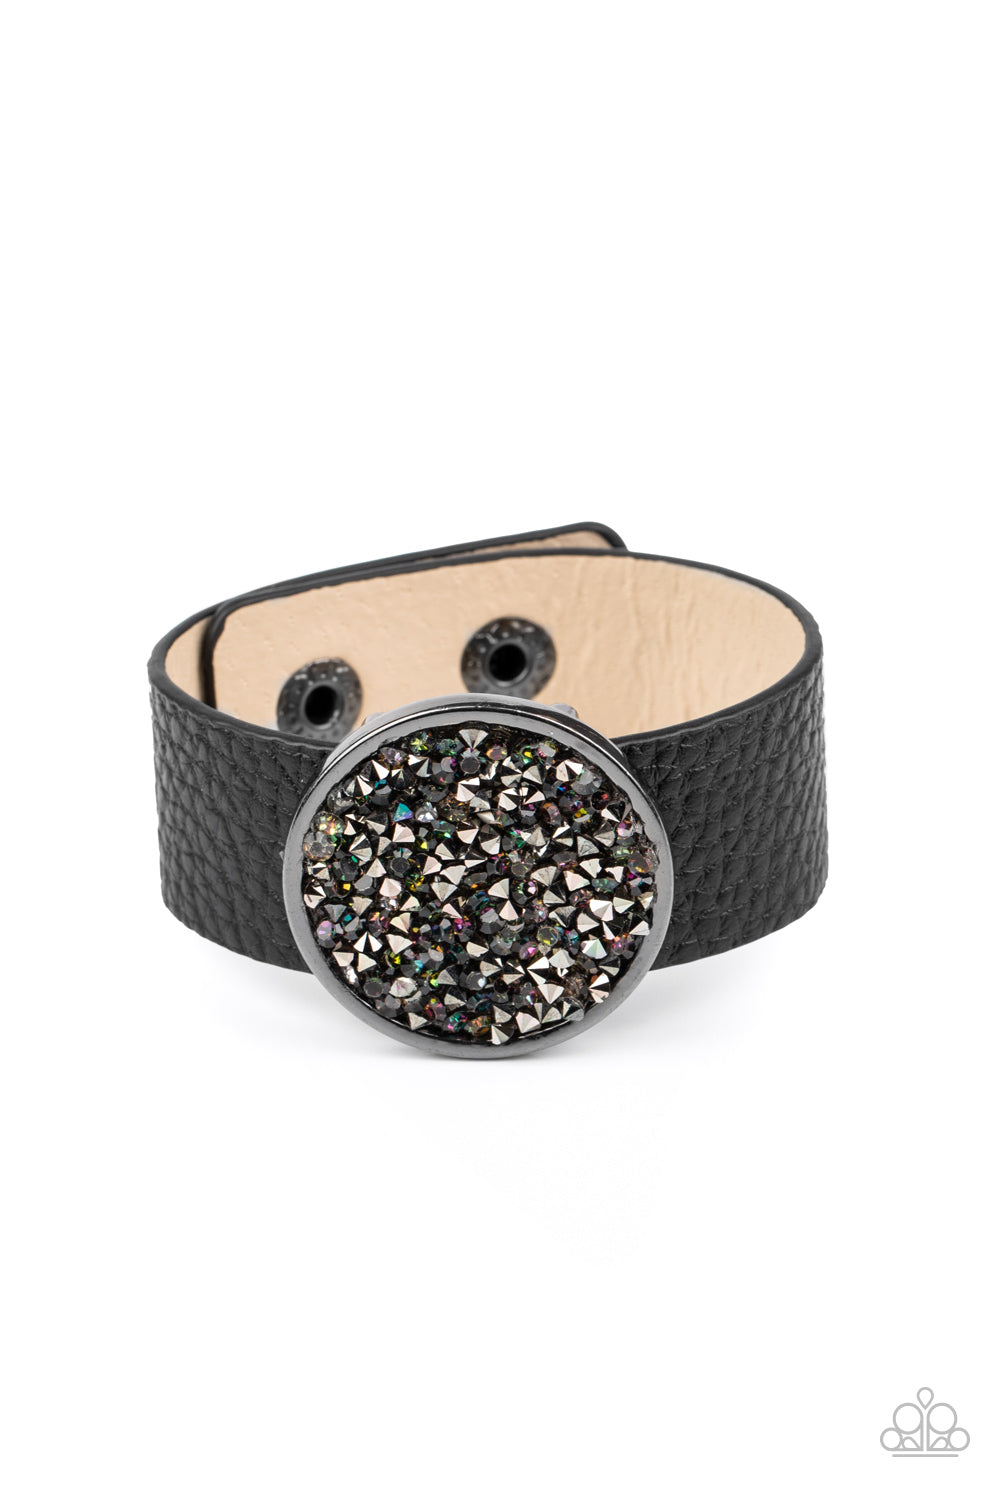 &lt;P&gt;A smoldering display of hematite and oil spill rhinestones scatter across the front of a gunmetal disc that glides along a black leather band for a stellar look. Features an adjustable snap closure.&lt;/P&gt;  

&lt;P&gt; &lt;I&gt;Sold as one individual bracelet.&lt;/I&gt;  &lt;/P&gt;


&lt;img src=\&quot;https://d9b54x484lq62.cloudfront.net/paparazzi/shopping/images/517_tag150x115_1.png\&quot; alt=\&quot;New Kit\&quot; align=\&quot;middle\&quot; height=\&quot;50\&quot; width=\&quot;50\&quot;/&gt;